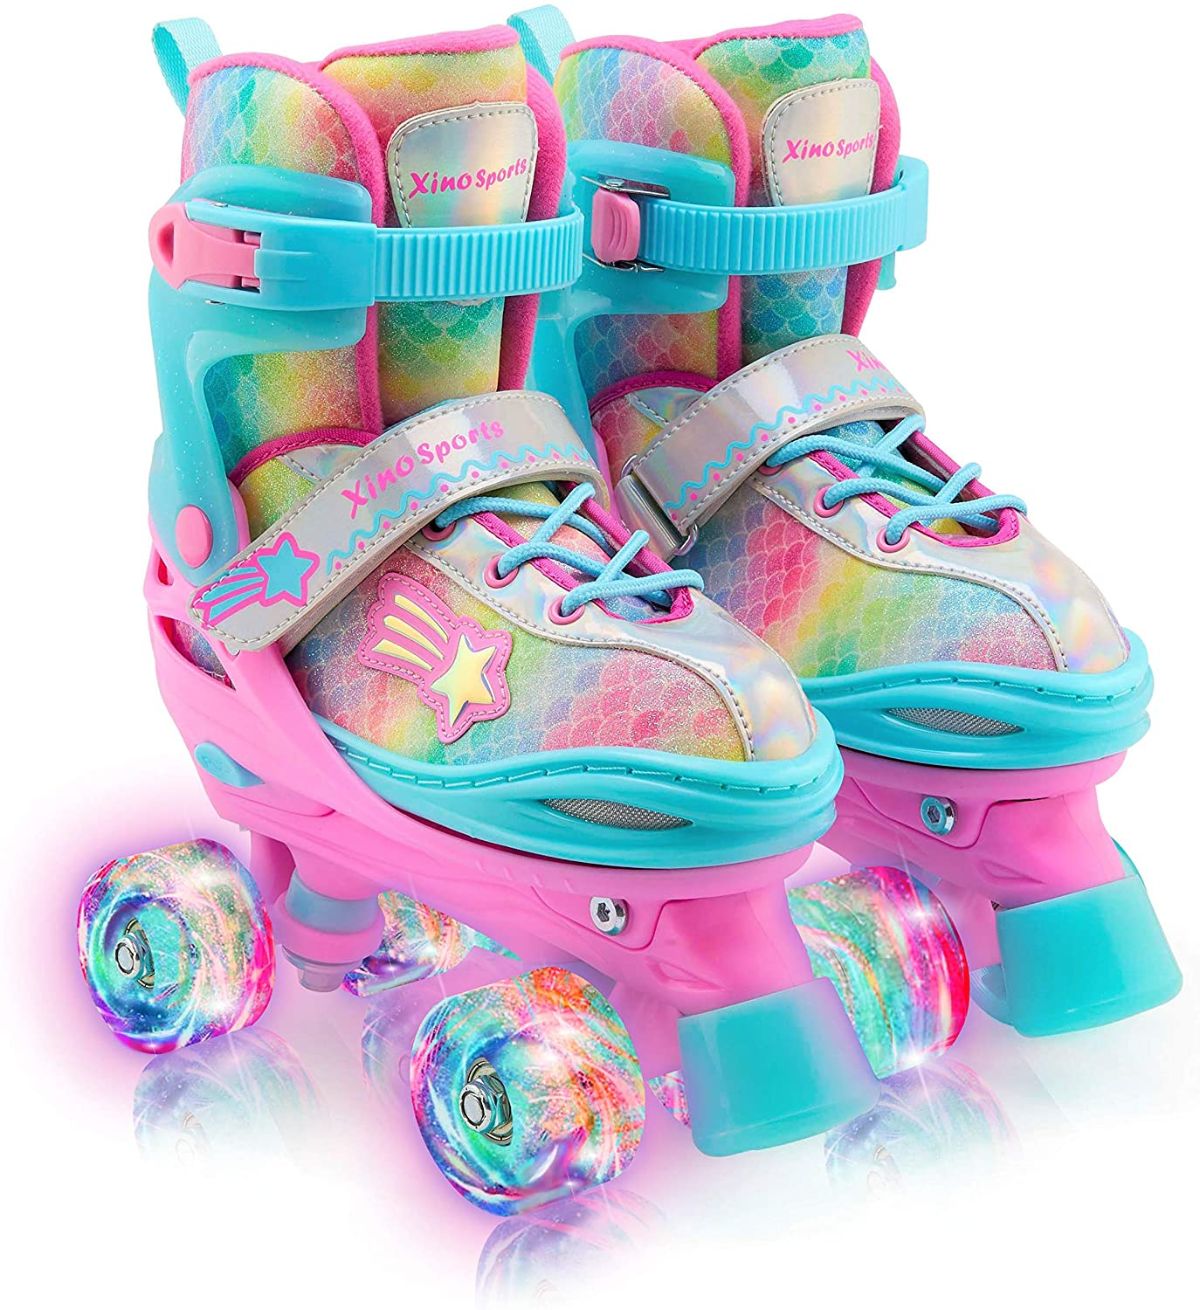 blue and pink roller skates on white background